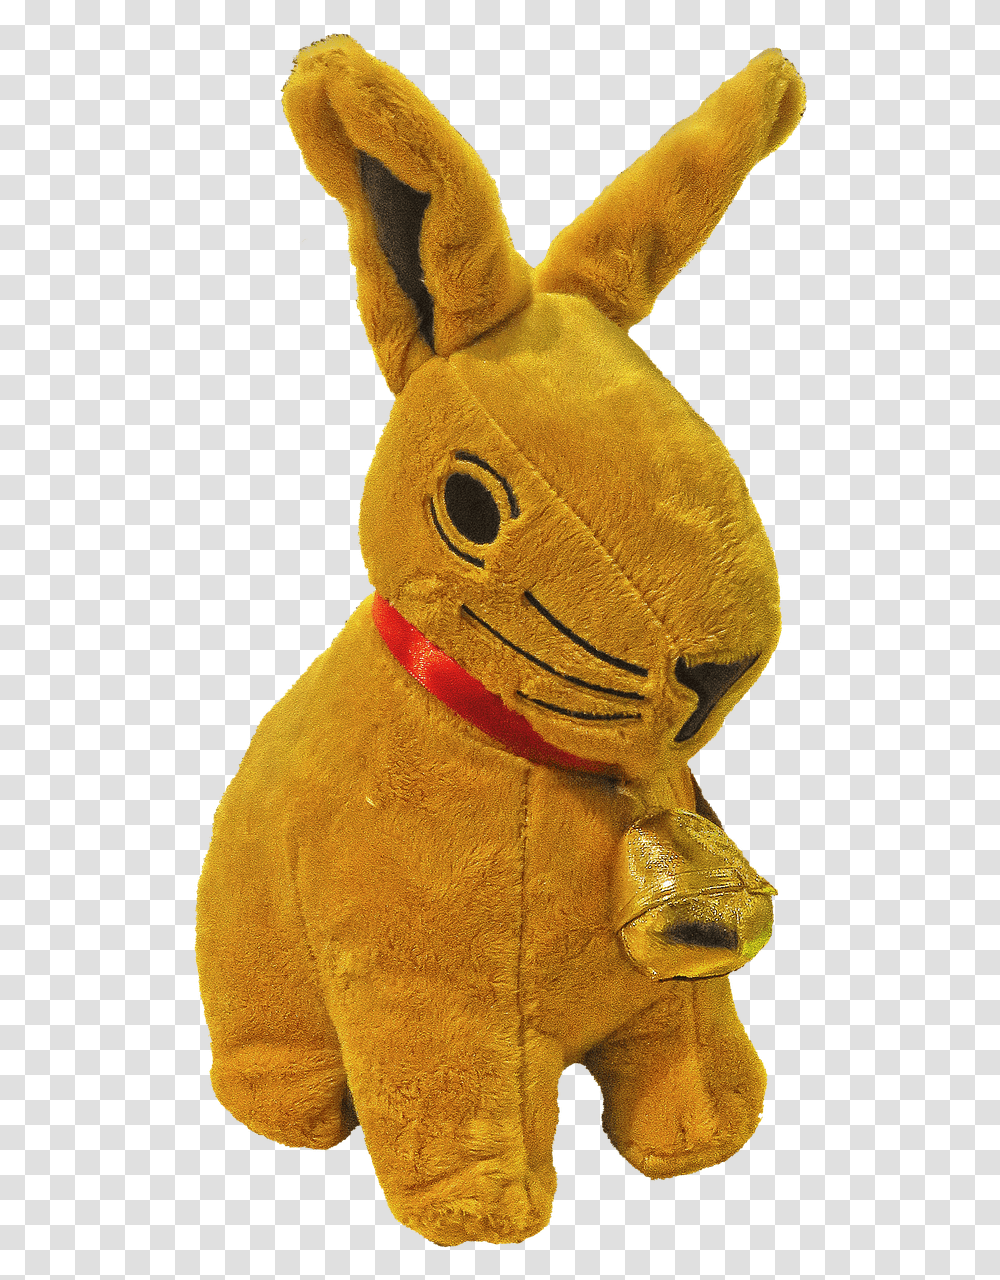 Easter Bunny Stuffed Animal Bell Conejo De Pascua Peluche, Toy, Plush, Doll Transparent Png